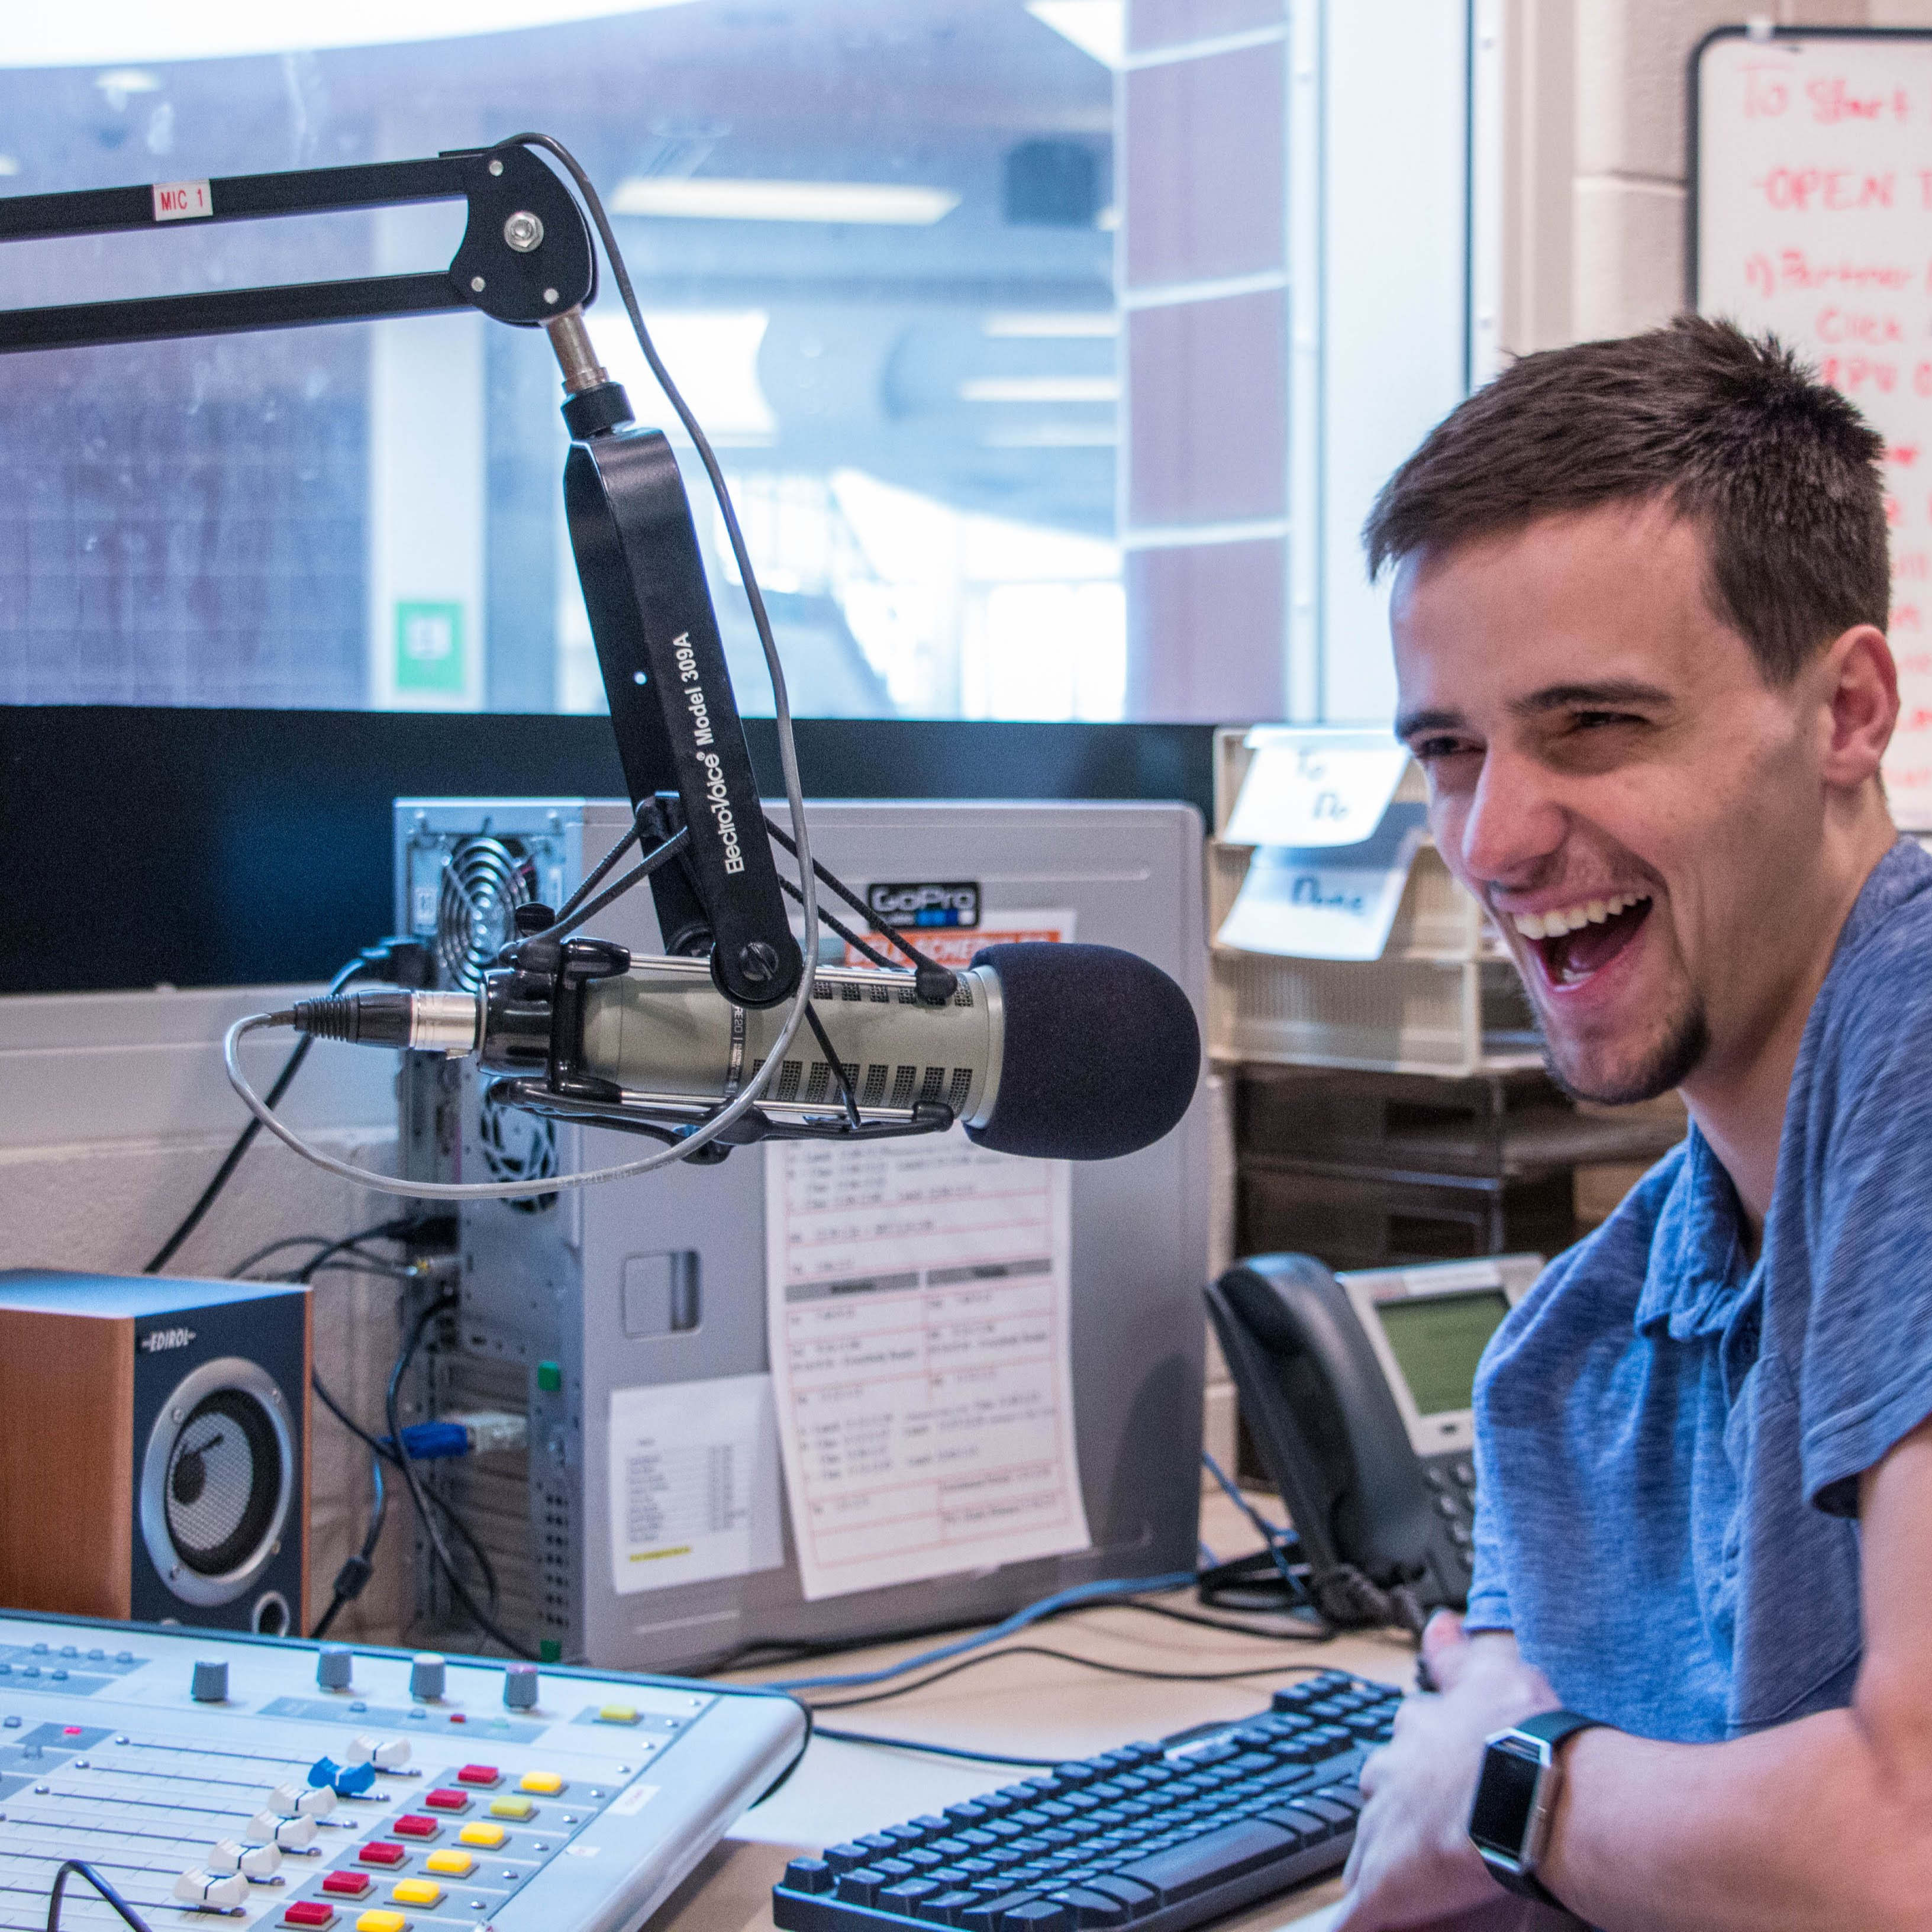 Student laughing next to microphone in a recording studio